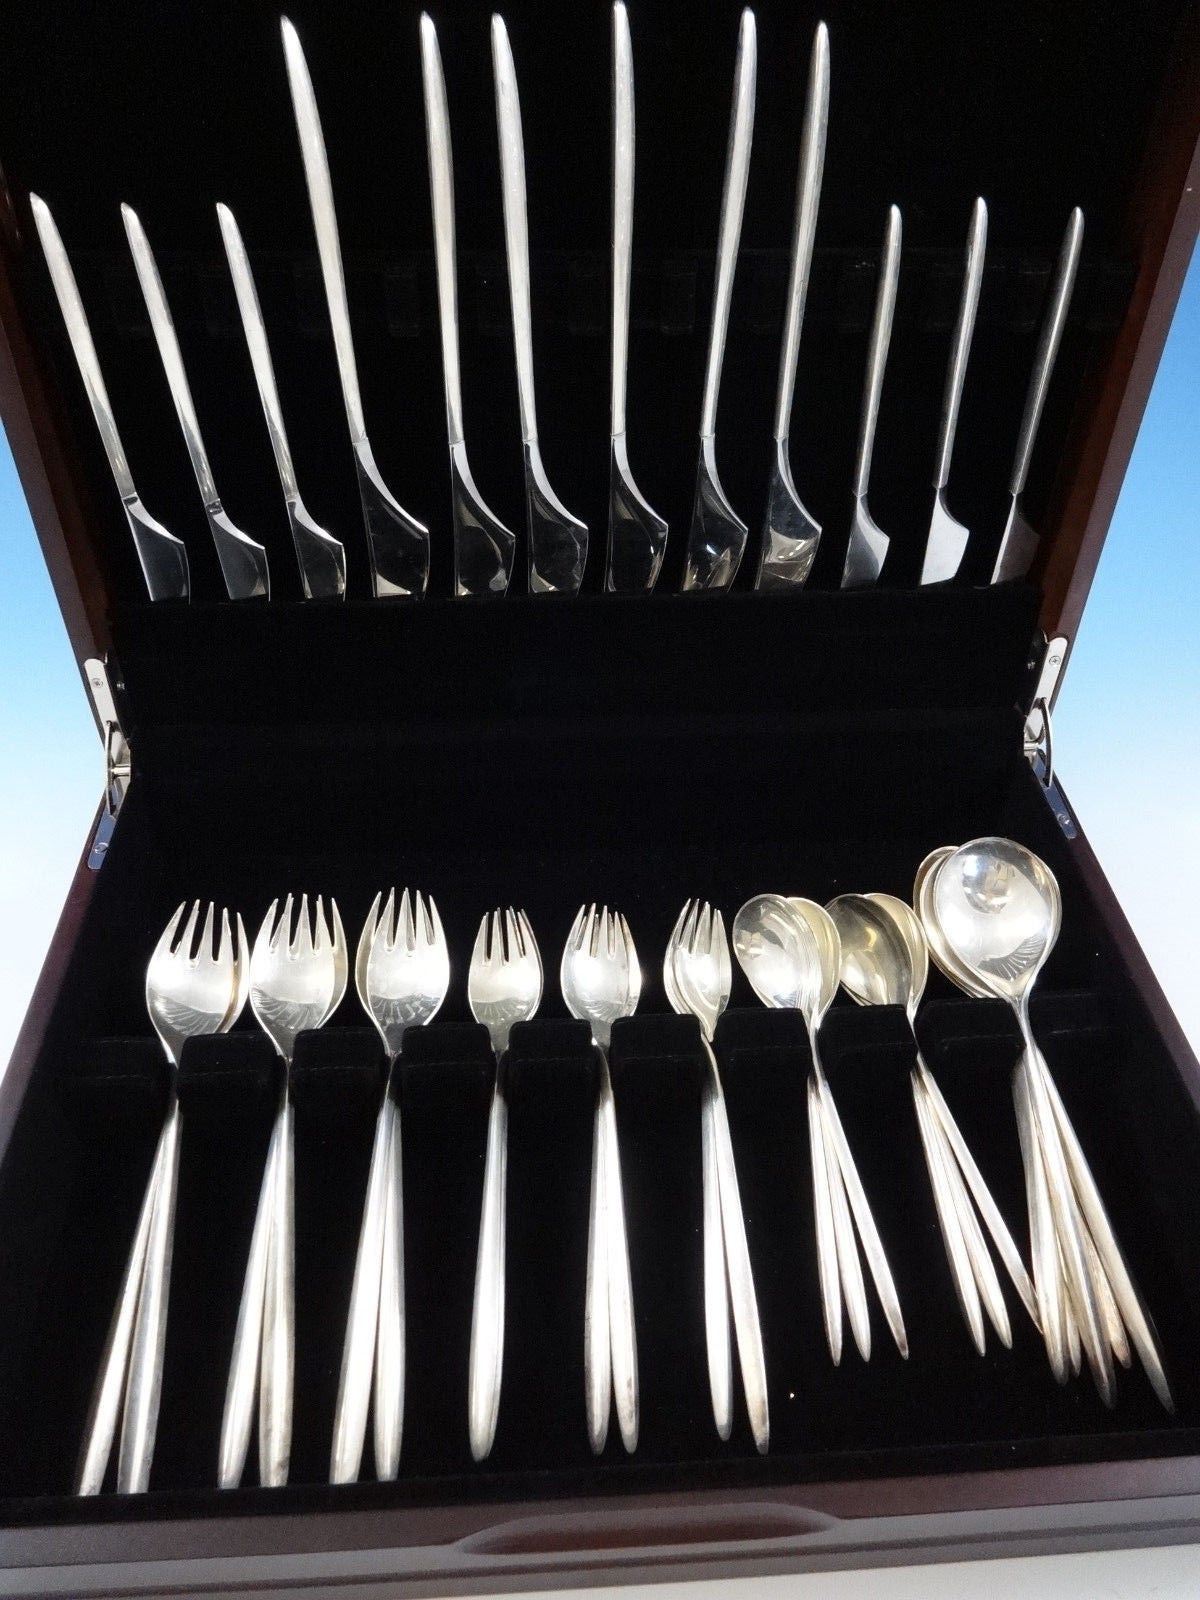 TRINITA BY COHR Danish MID-CENTURY MODERN sterling silver Flatware set -  36 PIECES. GREAT STARTER SET! This set includes:

6 KNIVES, 8 5/8